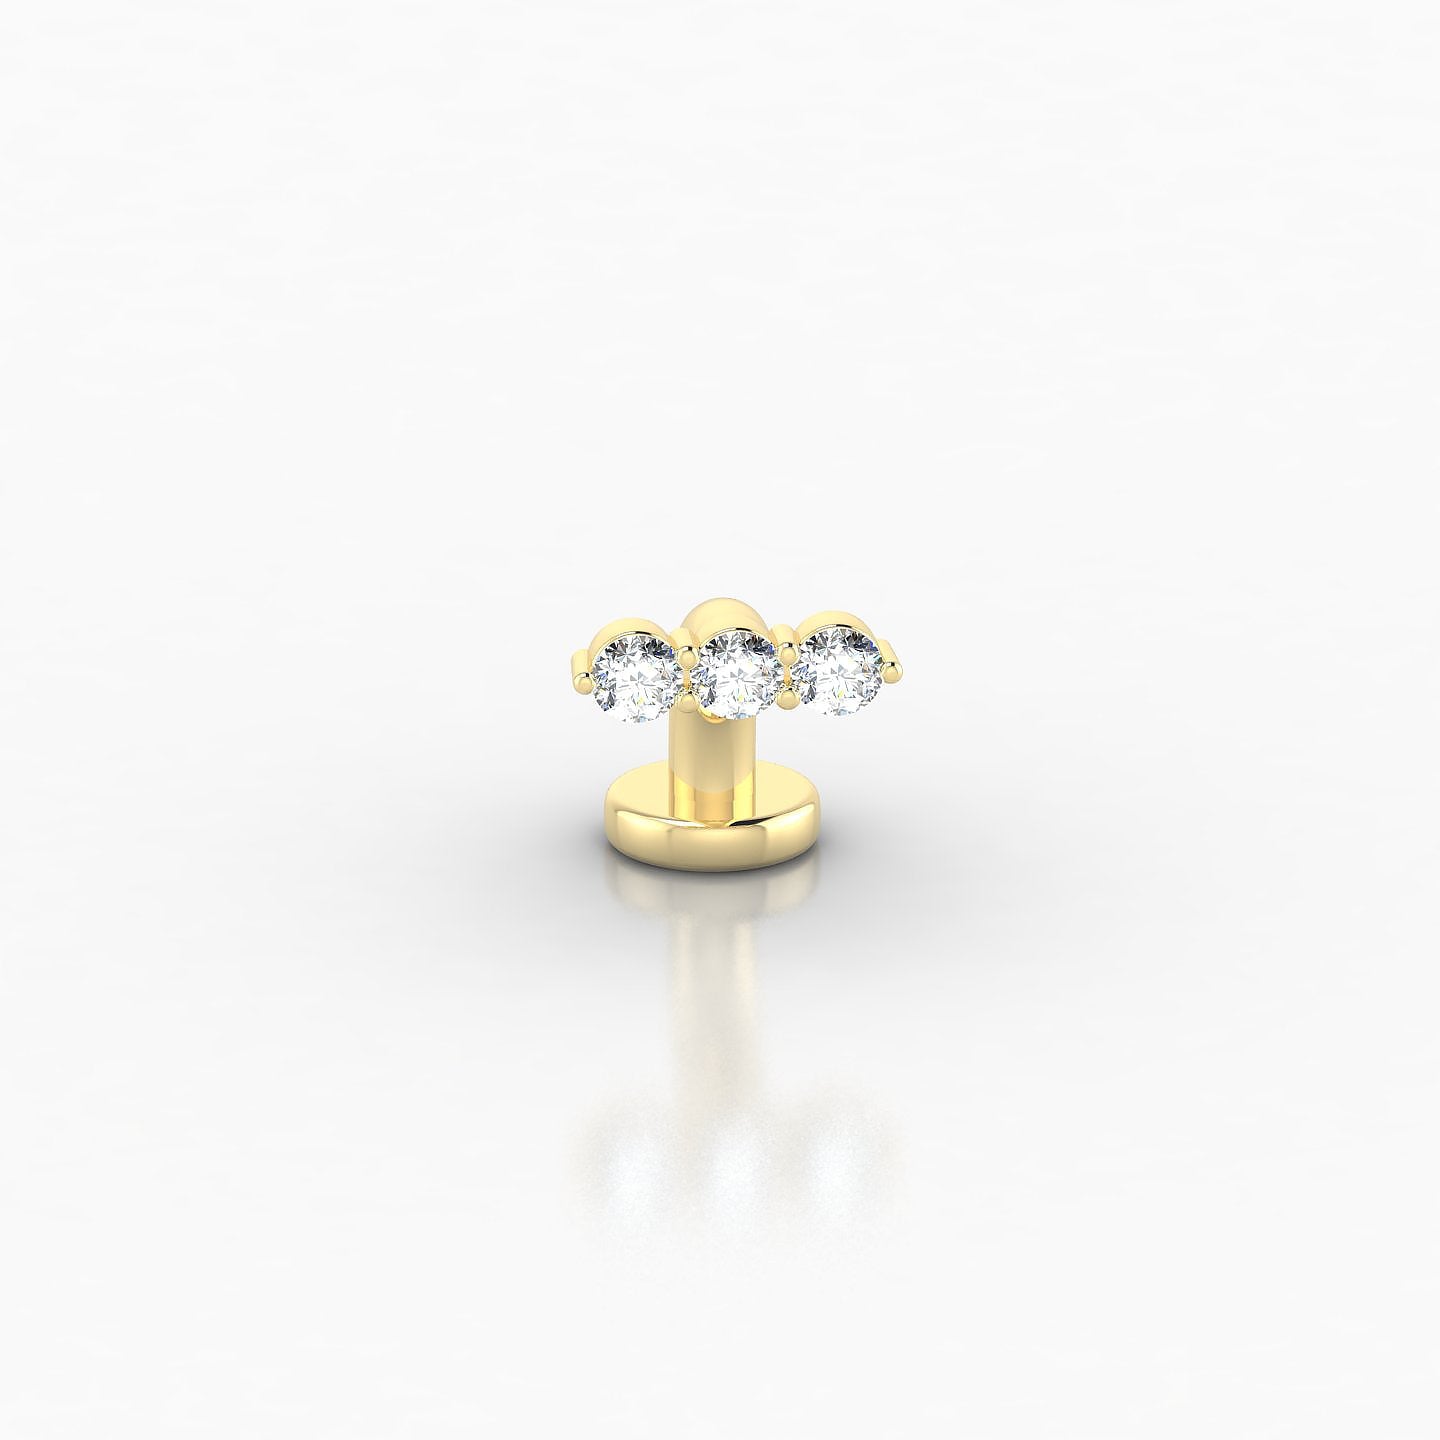 Ma'at | 18k Yellow Gold 6 mm 6.5 mm Trilogy Diamond Floating Navel Piercing